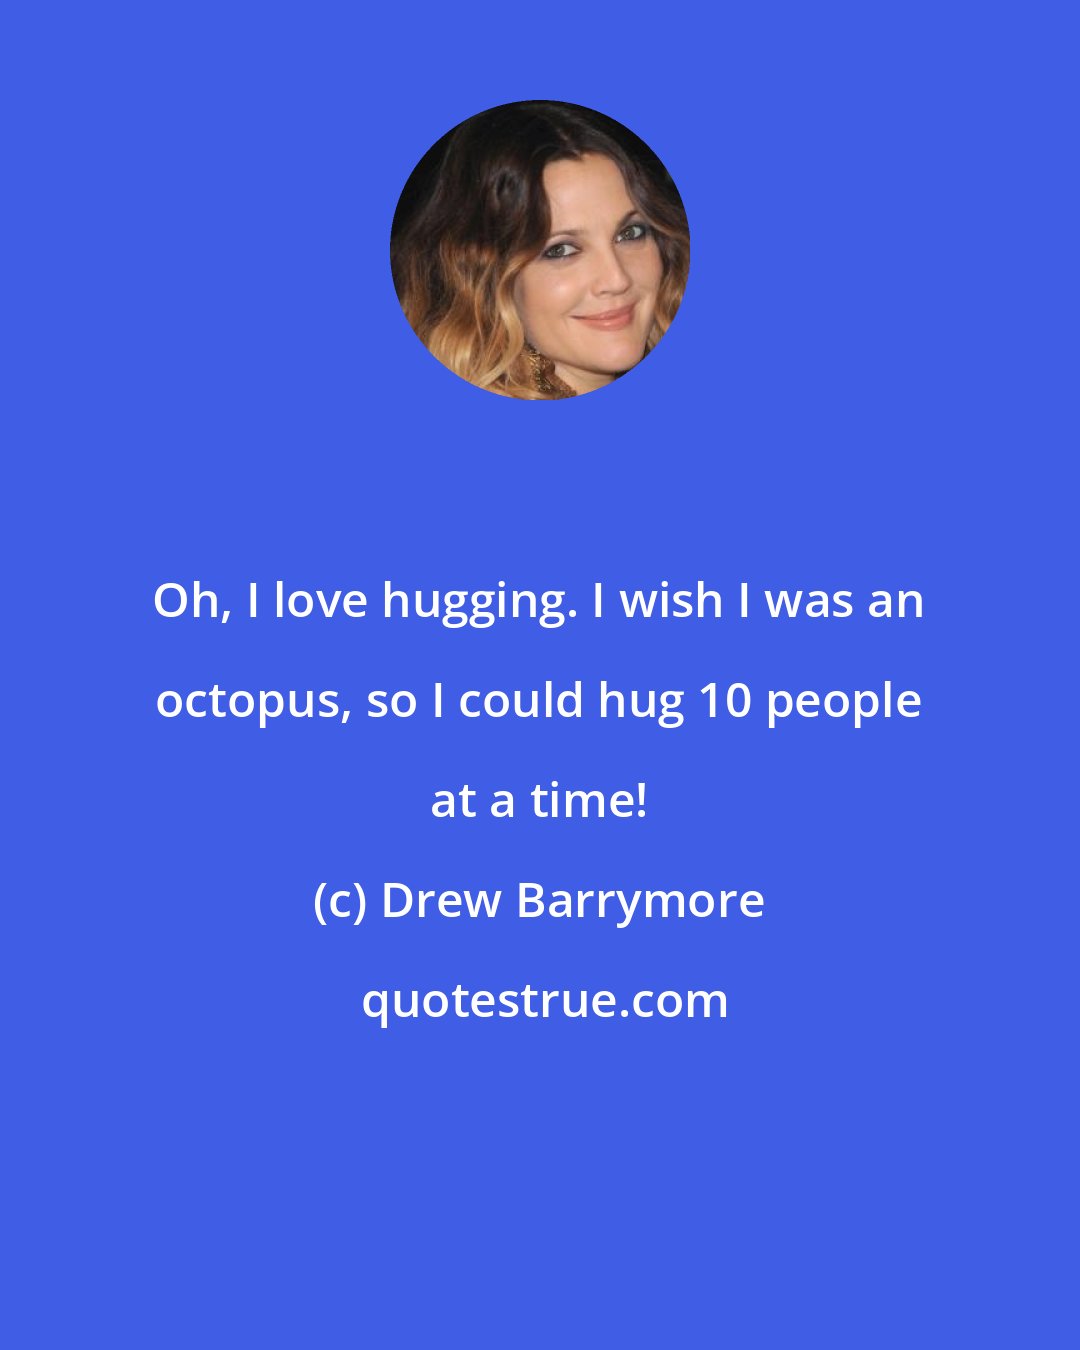 Drew Barrymore: Oh, I love hugging. I wish I was an octopus, so I could hug 10 people at a time!